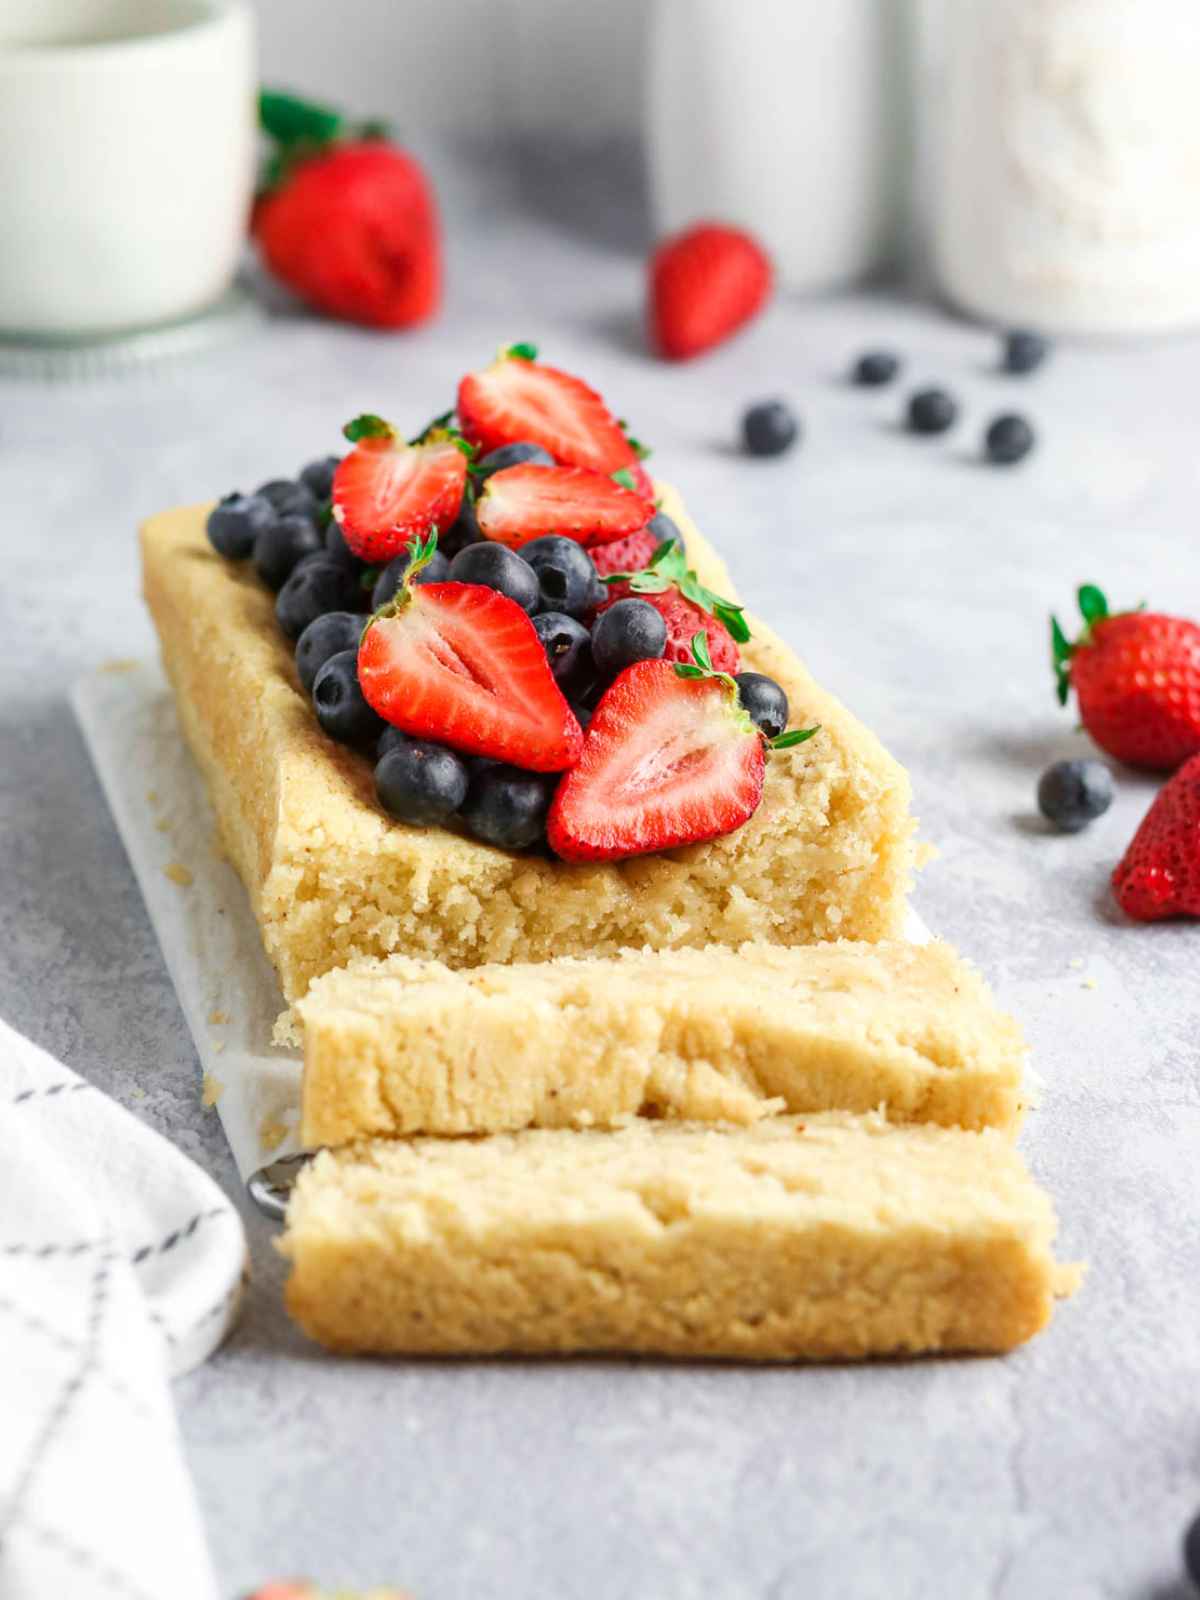 Pound cake topped with fresh berries.